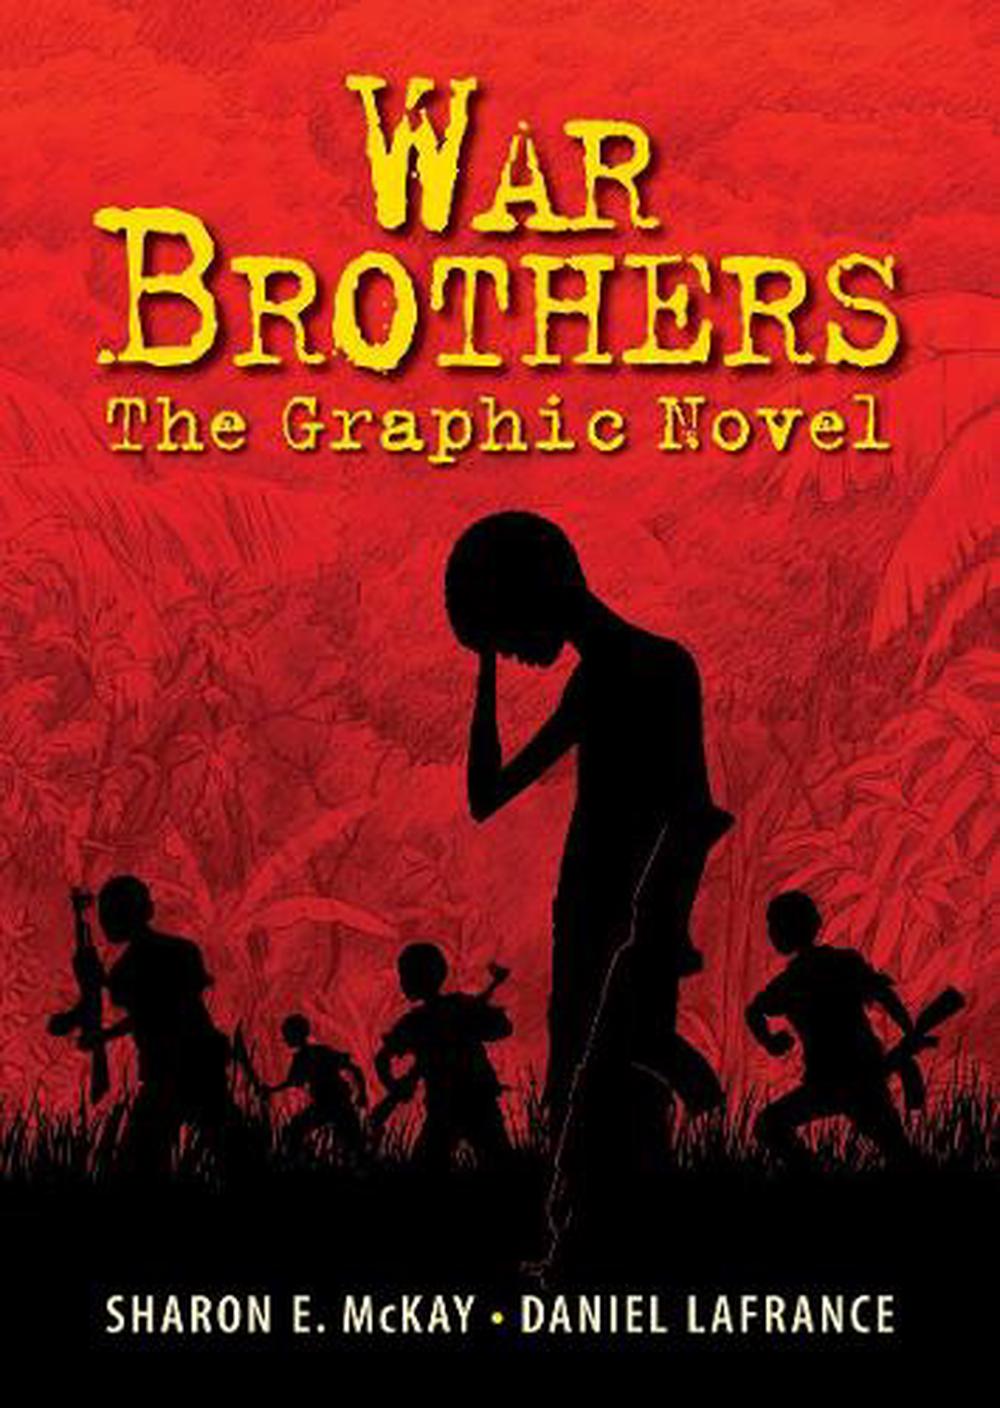 war brothers by sharon e mckay